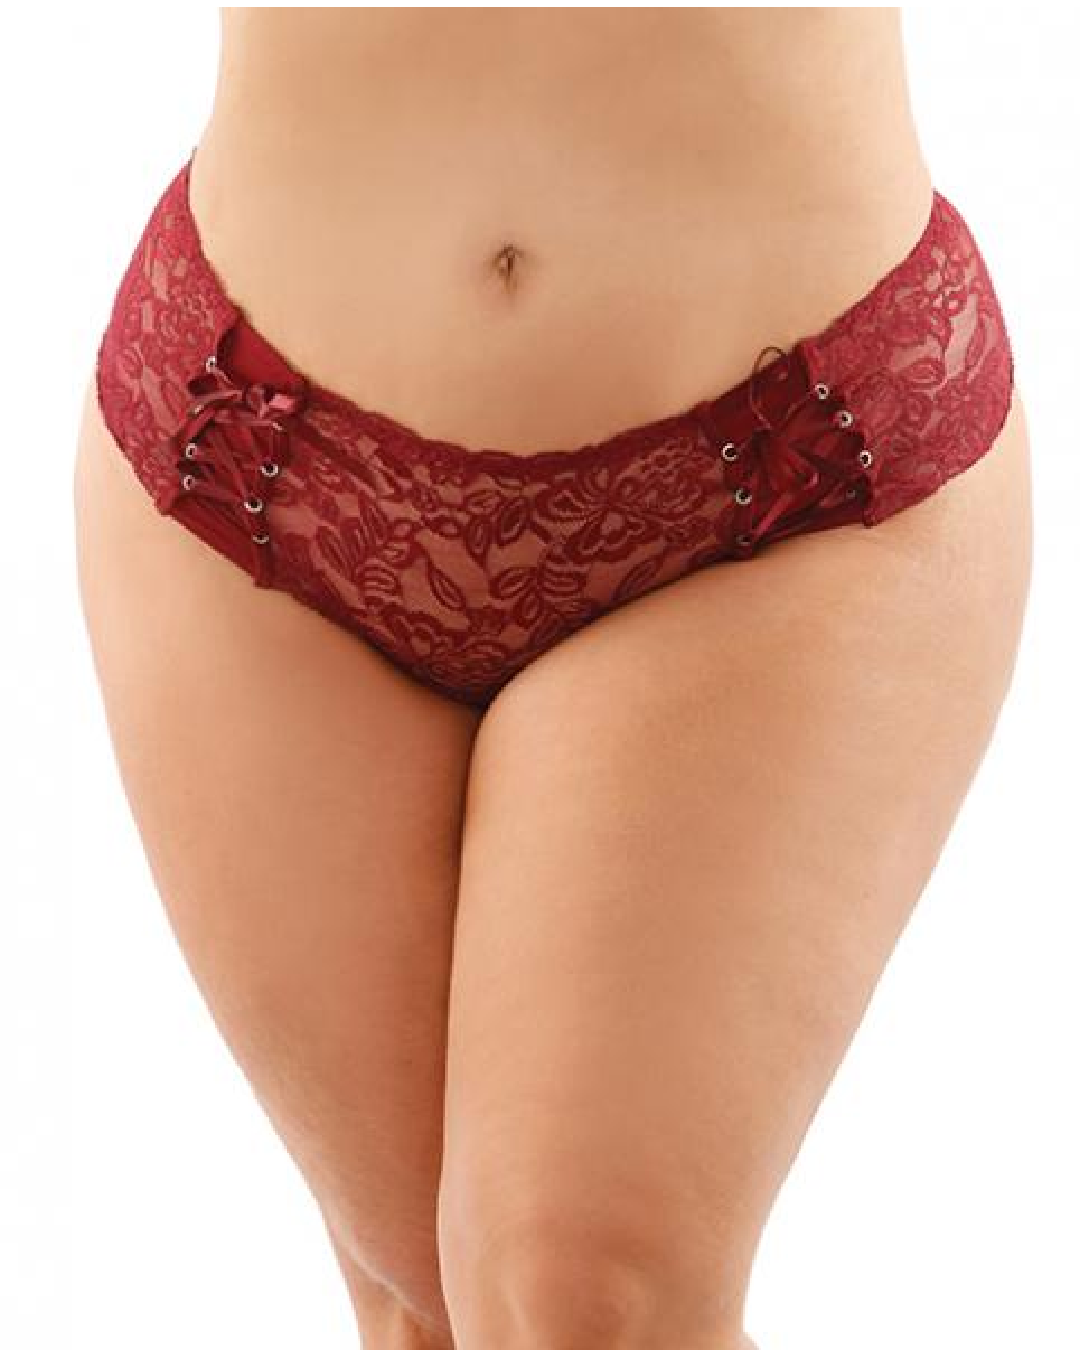 Crotchless Lace Boyshort With Lace-up Panel Garnet - Queen Size on model 